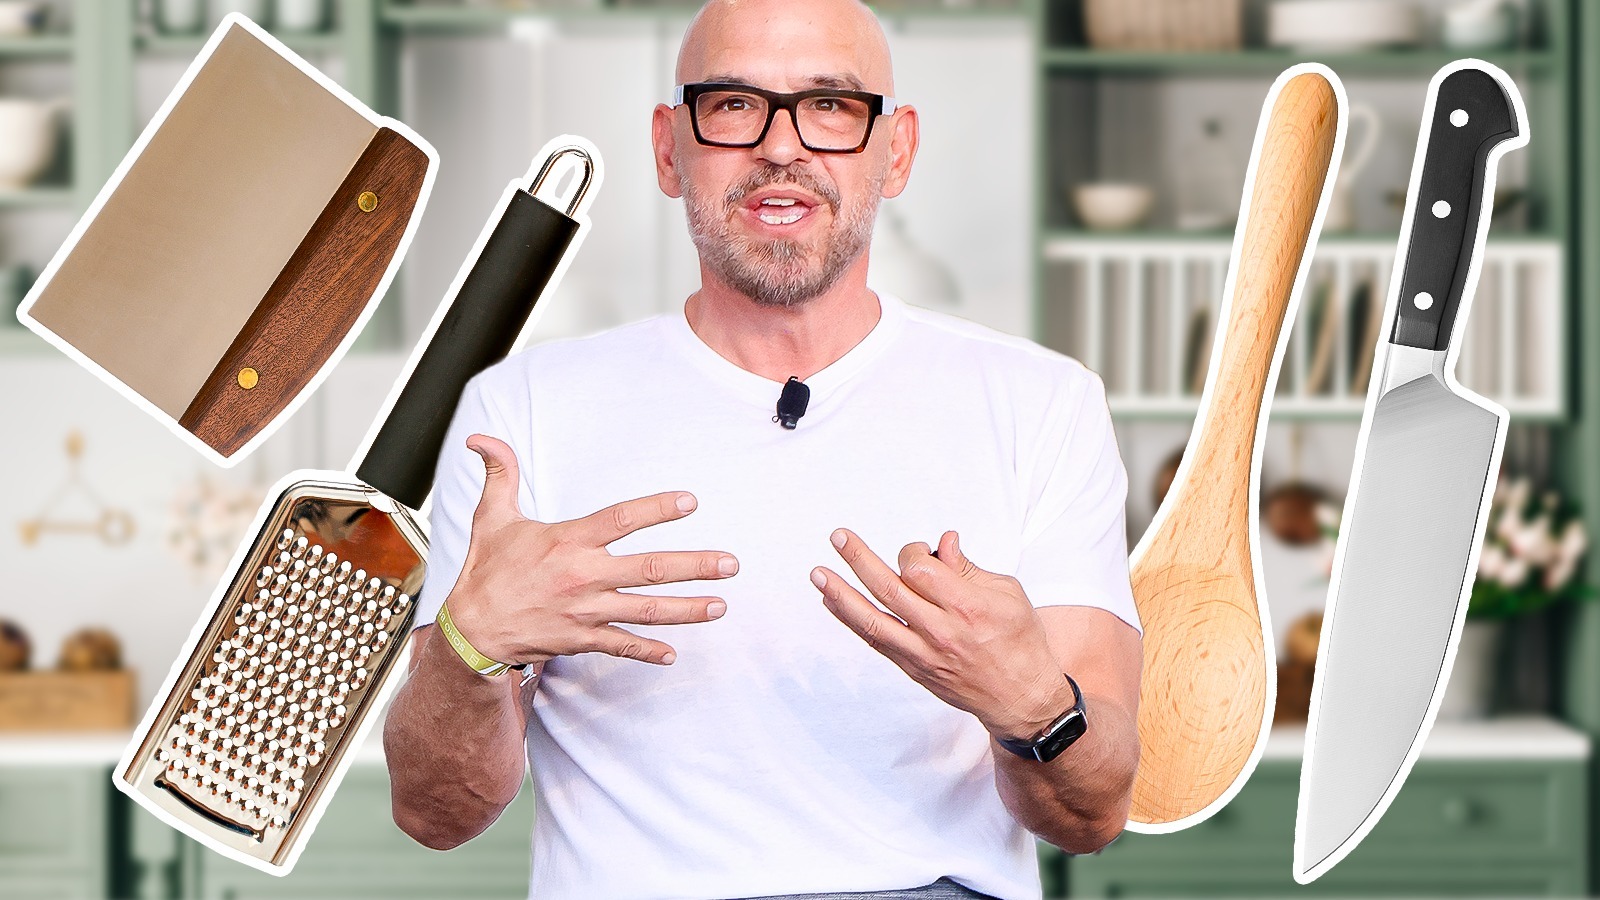 https://www.tastingtable.com/img/gallery/the-only-kitchen-tools-you-need-according-to-michael-symon-exclusive/l-intro-1697470280.jpg